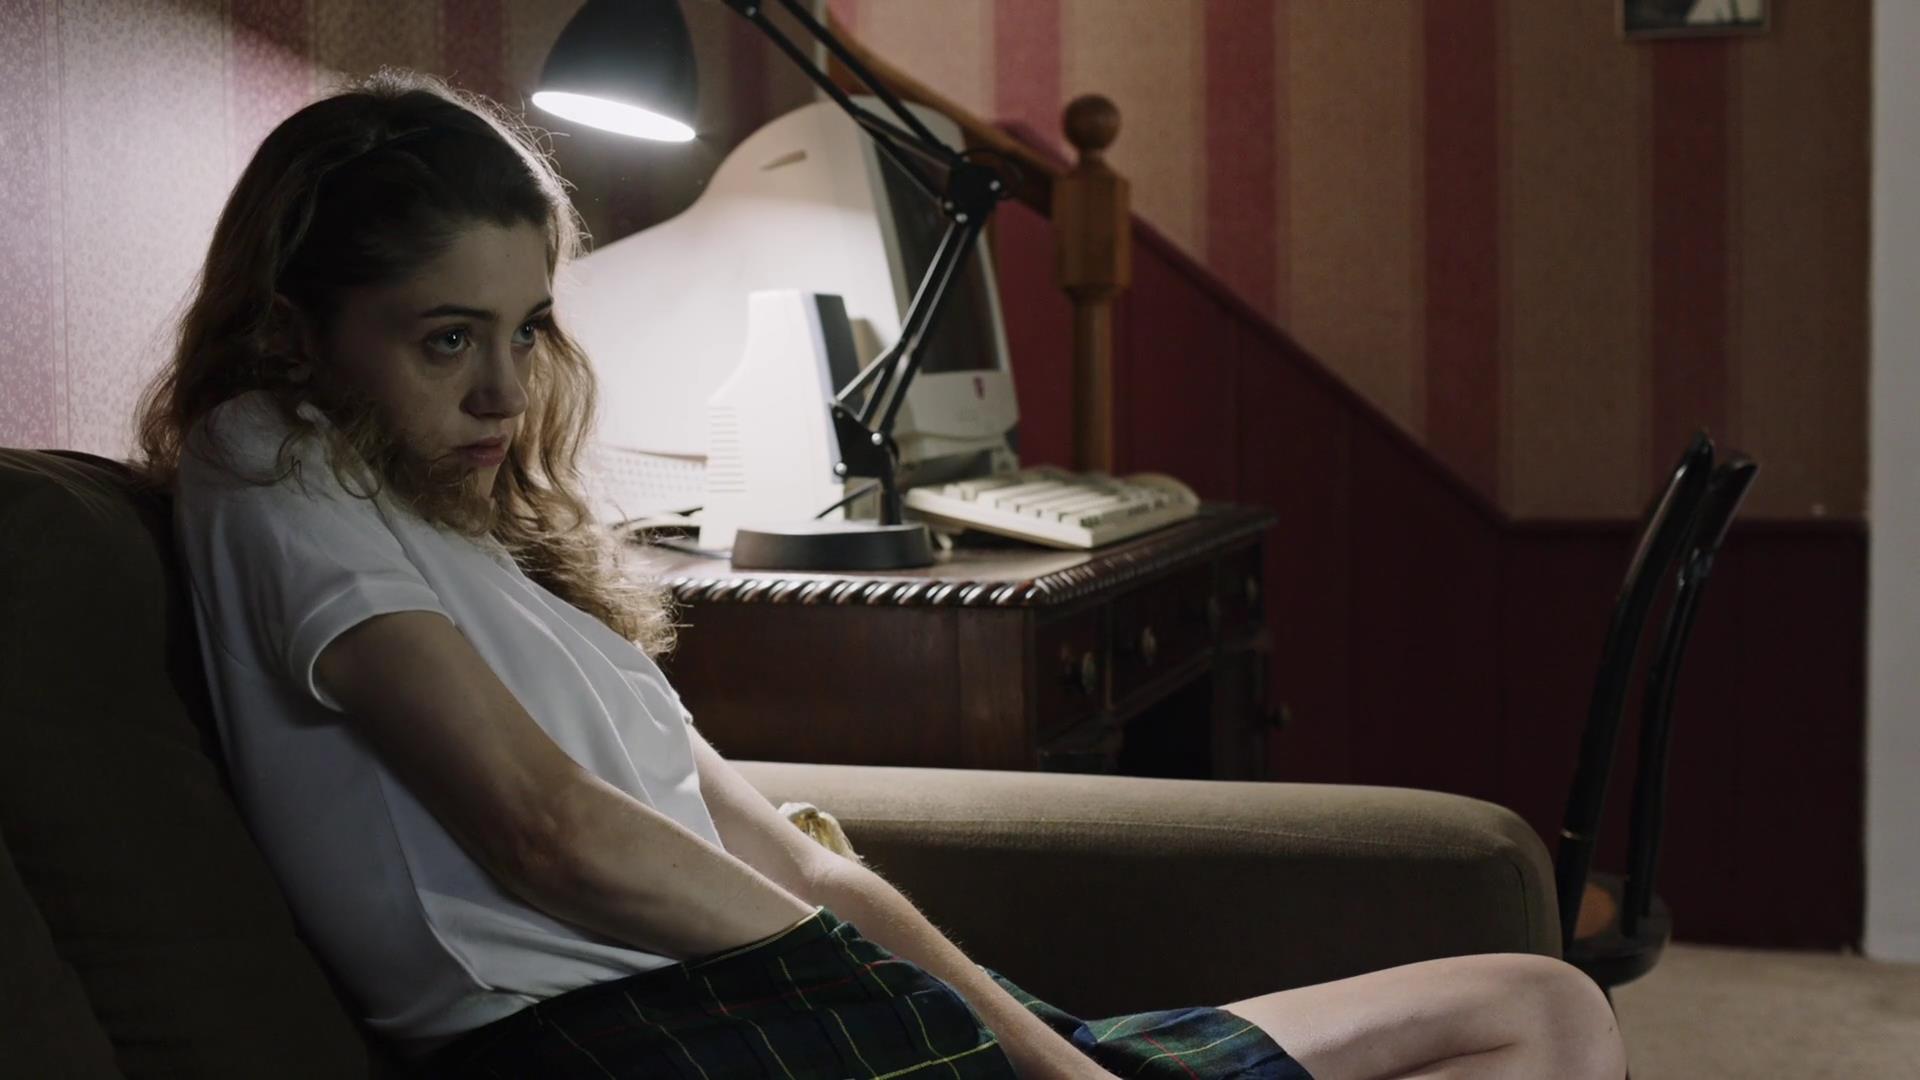 Natalia Dyer | The Fappening. 2014-2019 celebrity photo leaks!